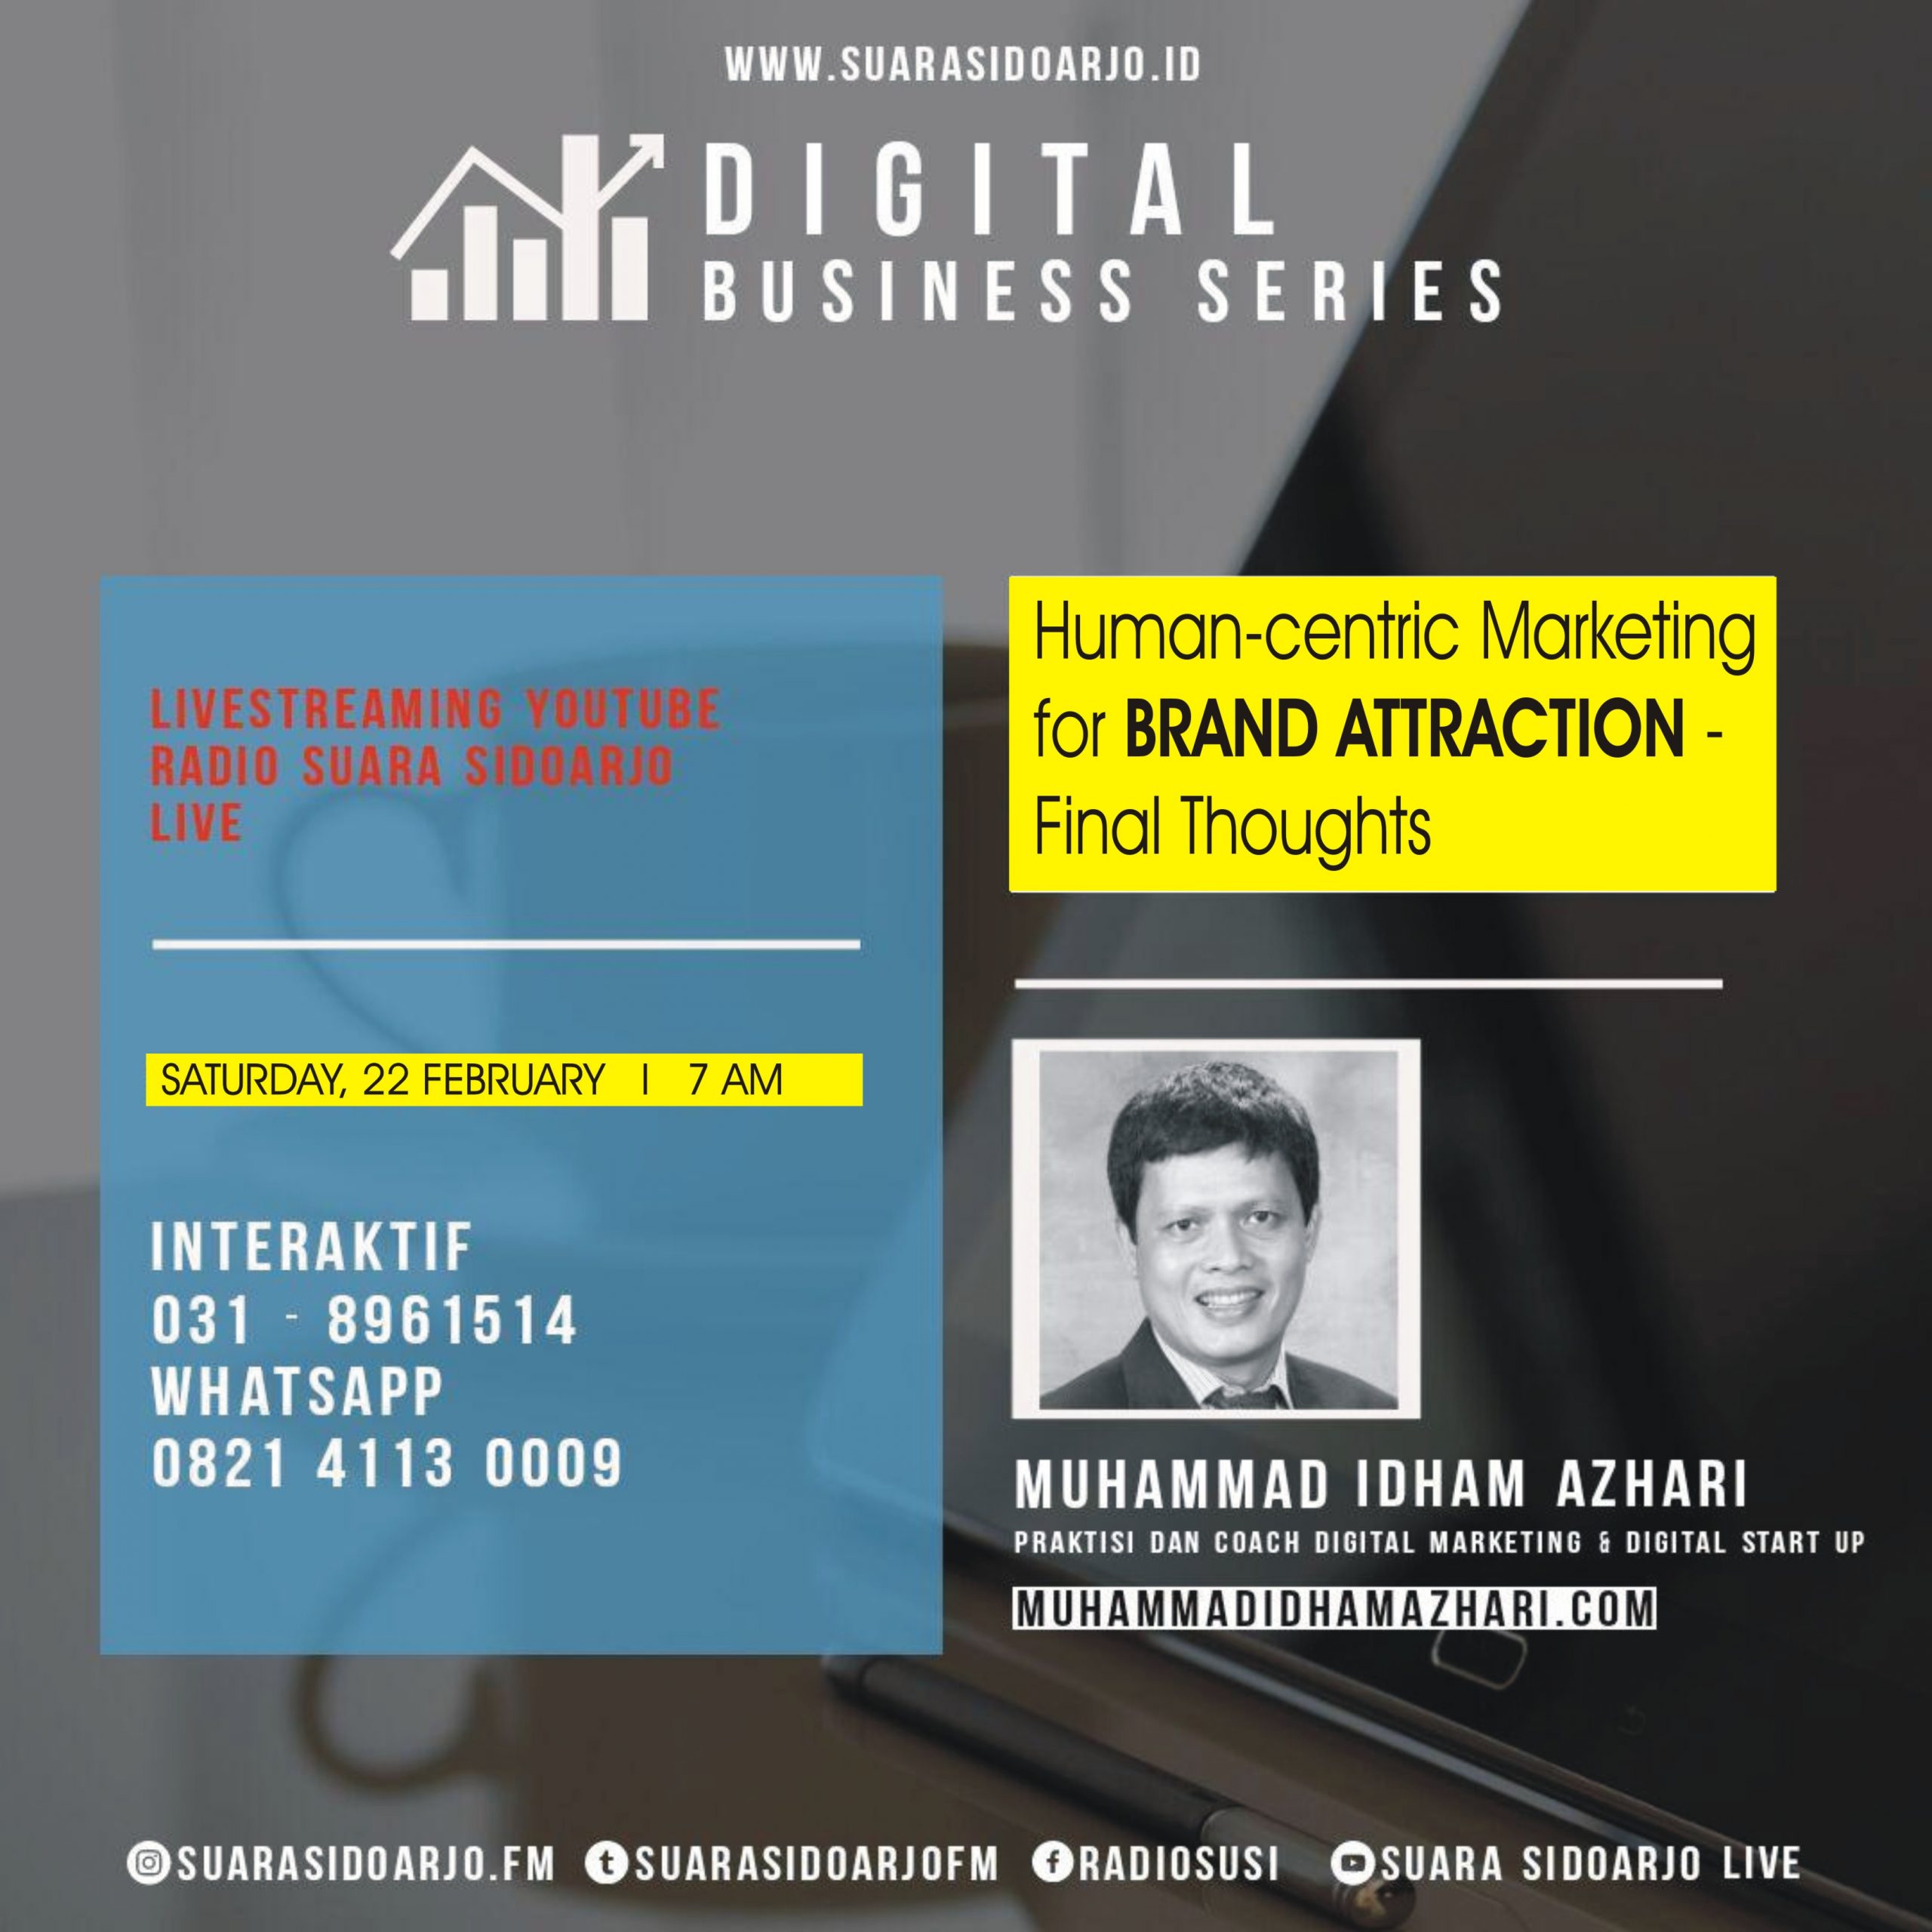 Human-centric Marketing for BRAND ATTRACTION - Final Thoughts Melalui Suara Sidoarjo